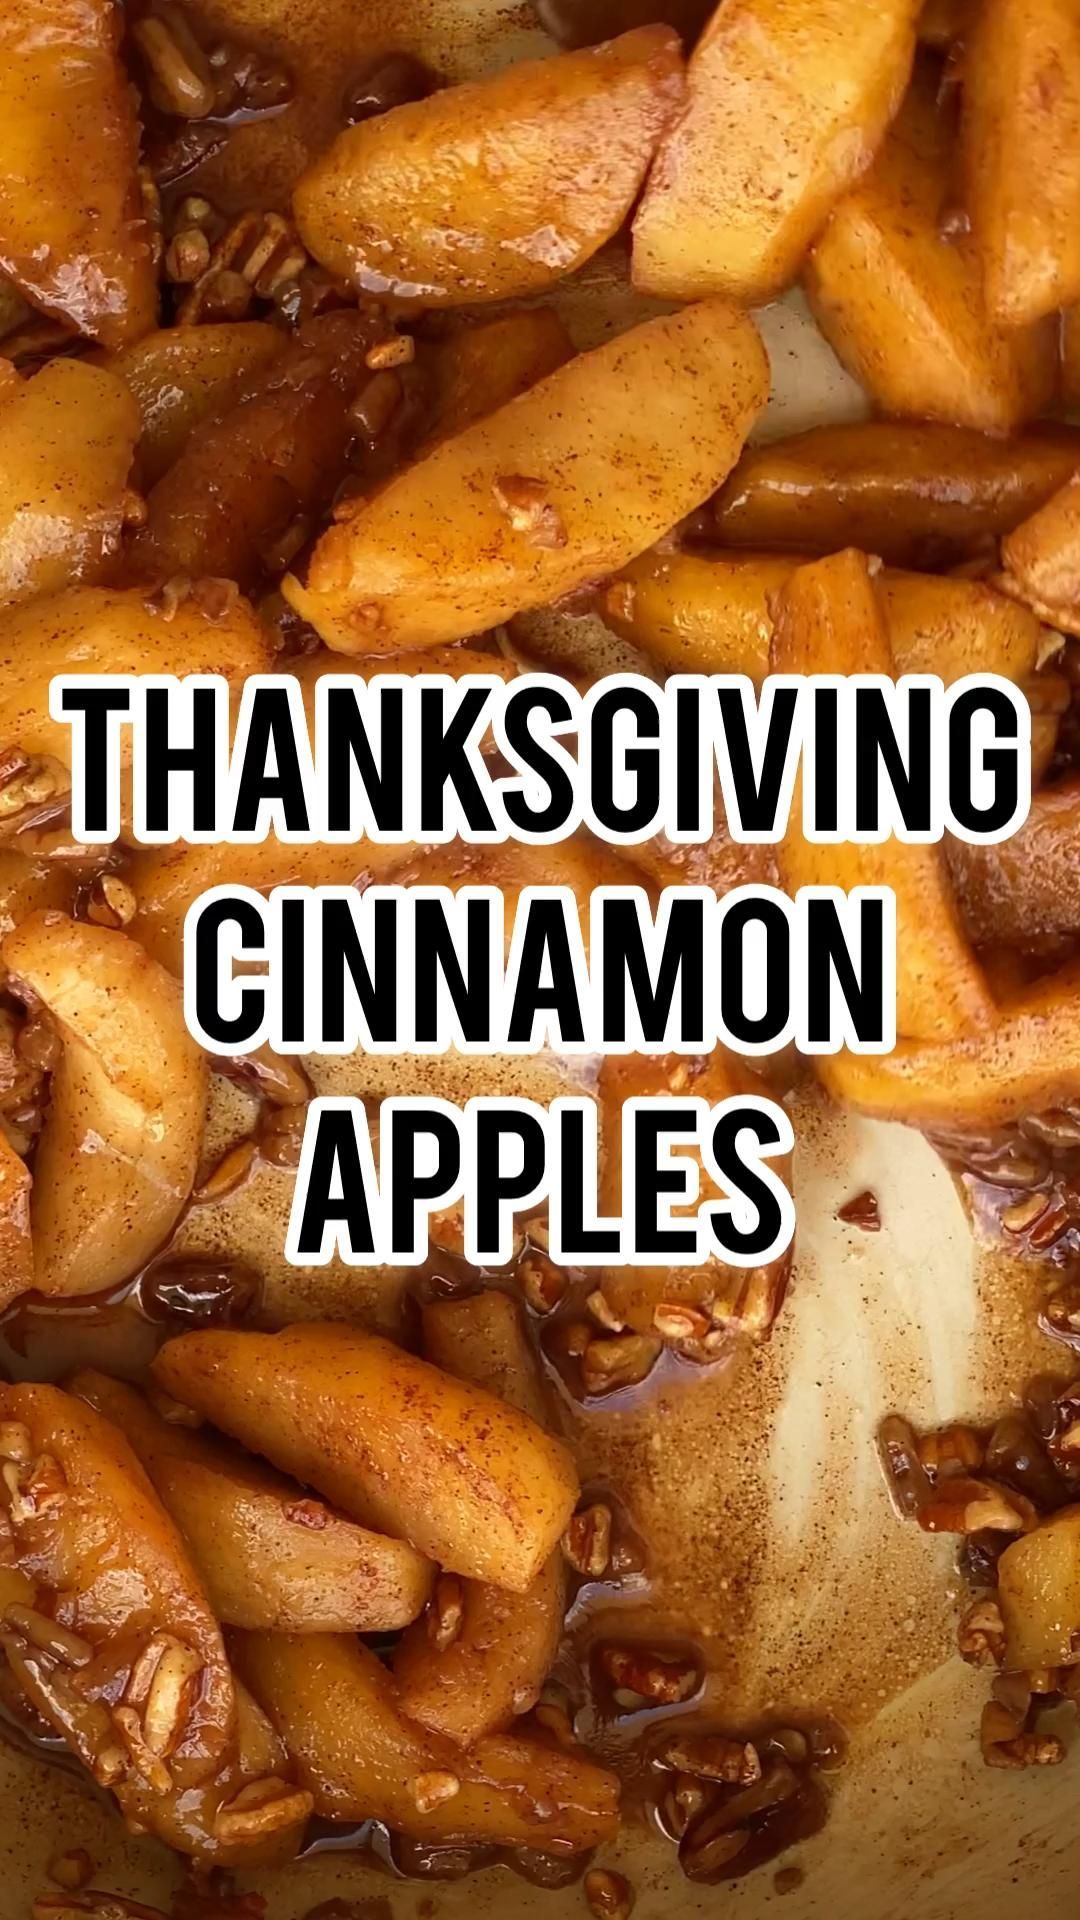 Thanksgiving Cinnamon Apples (SIDE DISH) - Thanksgiving Cinnamon Apples (SIDE DISH) -   21 thanksgiving recipes side dishes easy ideas